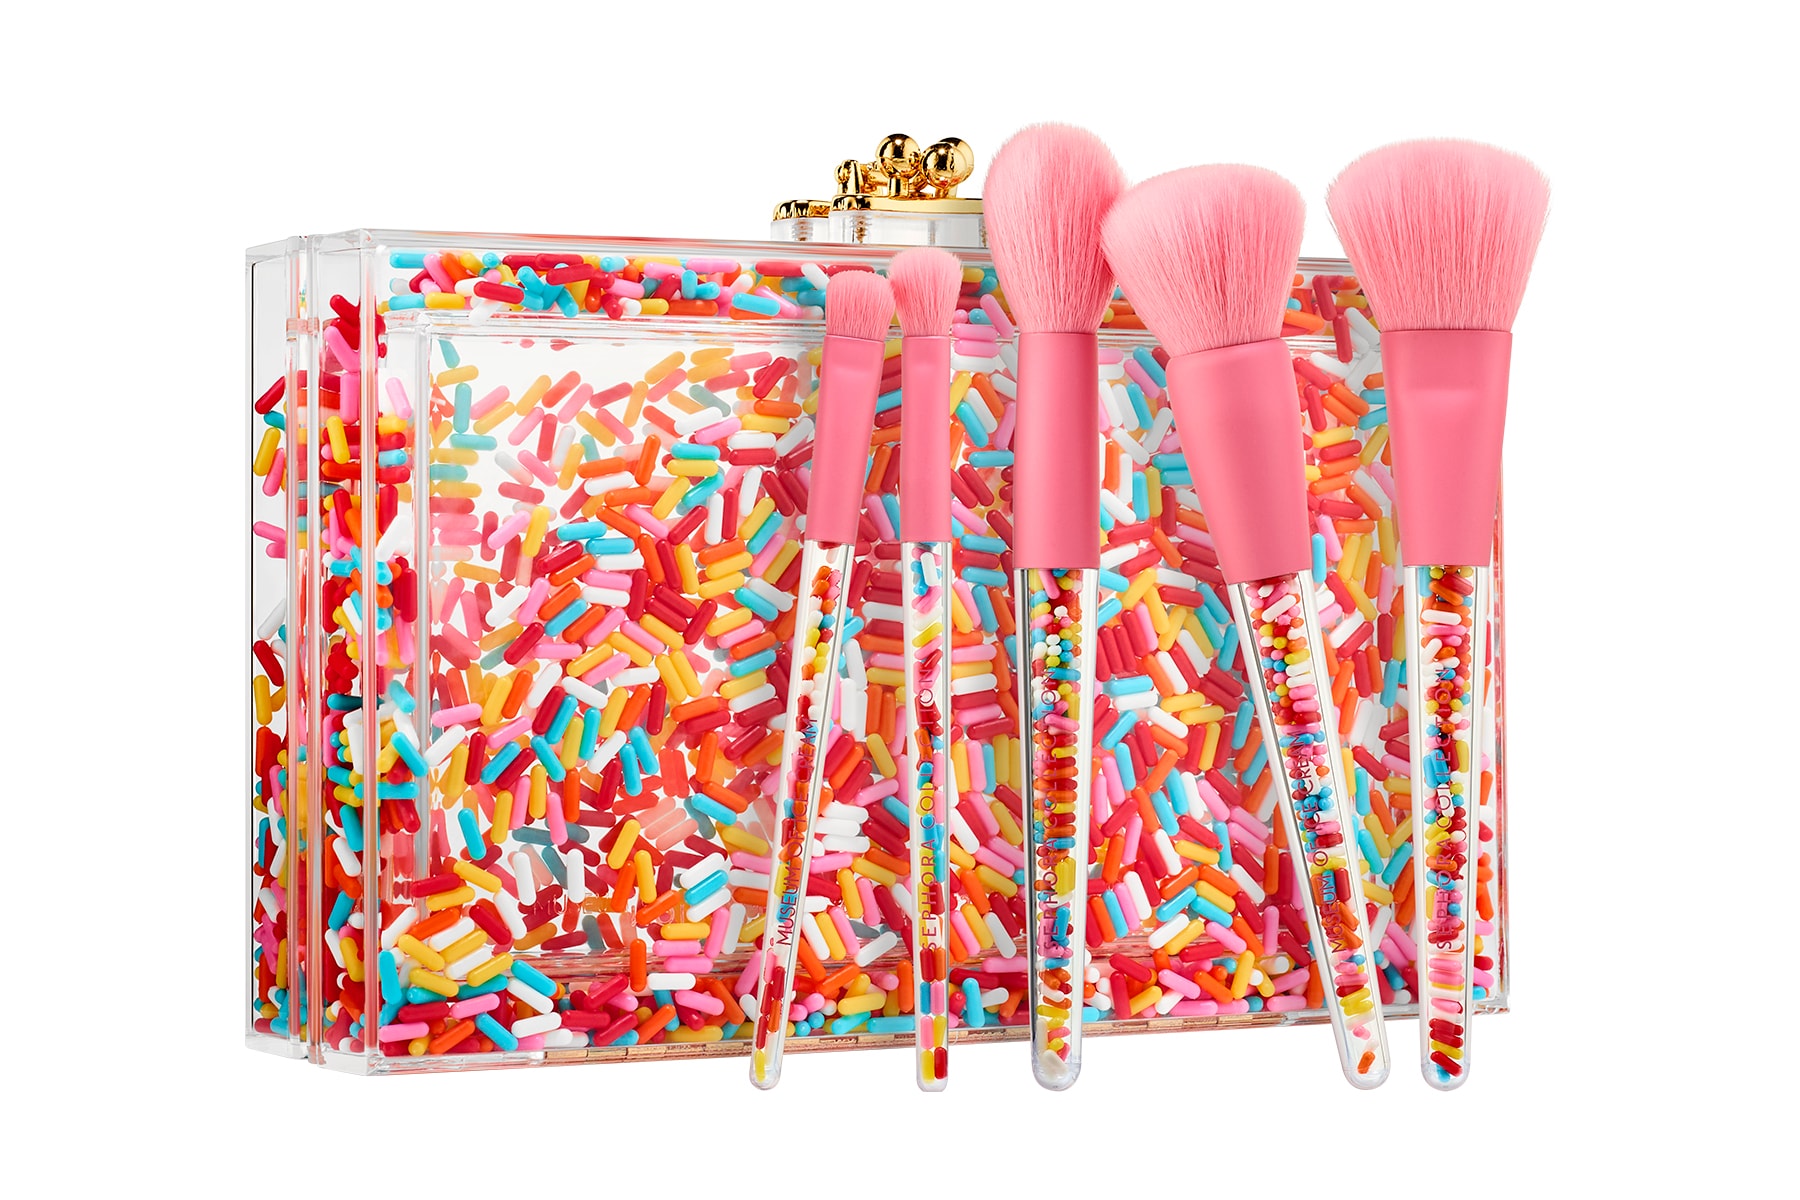 Museum of Ice Cream Sephora Makeup Collaboration Beauty Brushes Clutch Pink Sprinkle